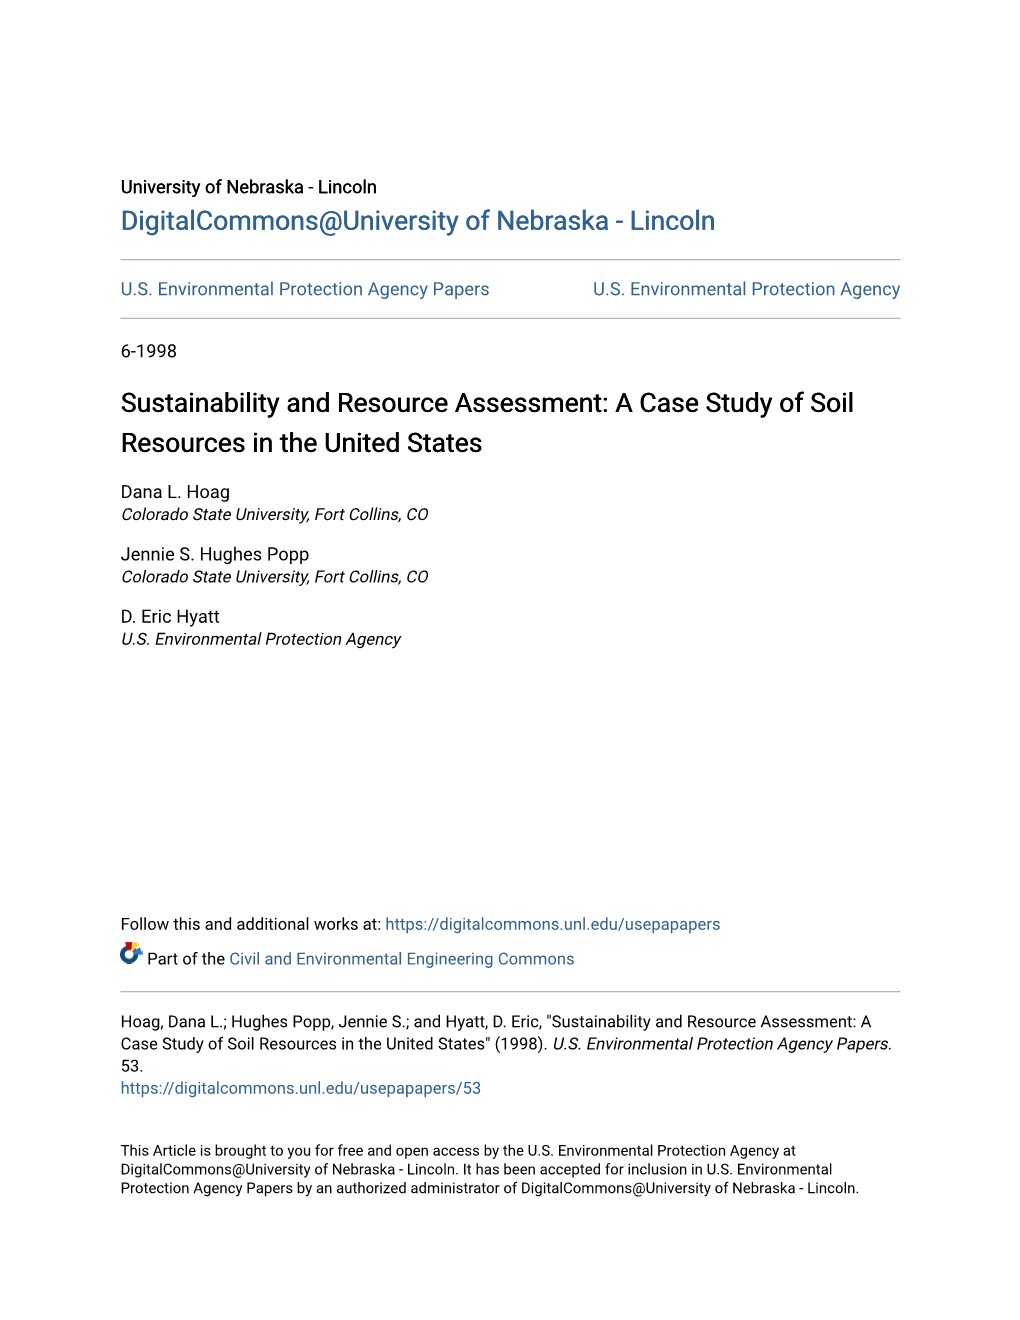 Sustainability and Resource Assessment: a Case Study of Soil Resources in the United States